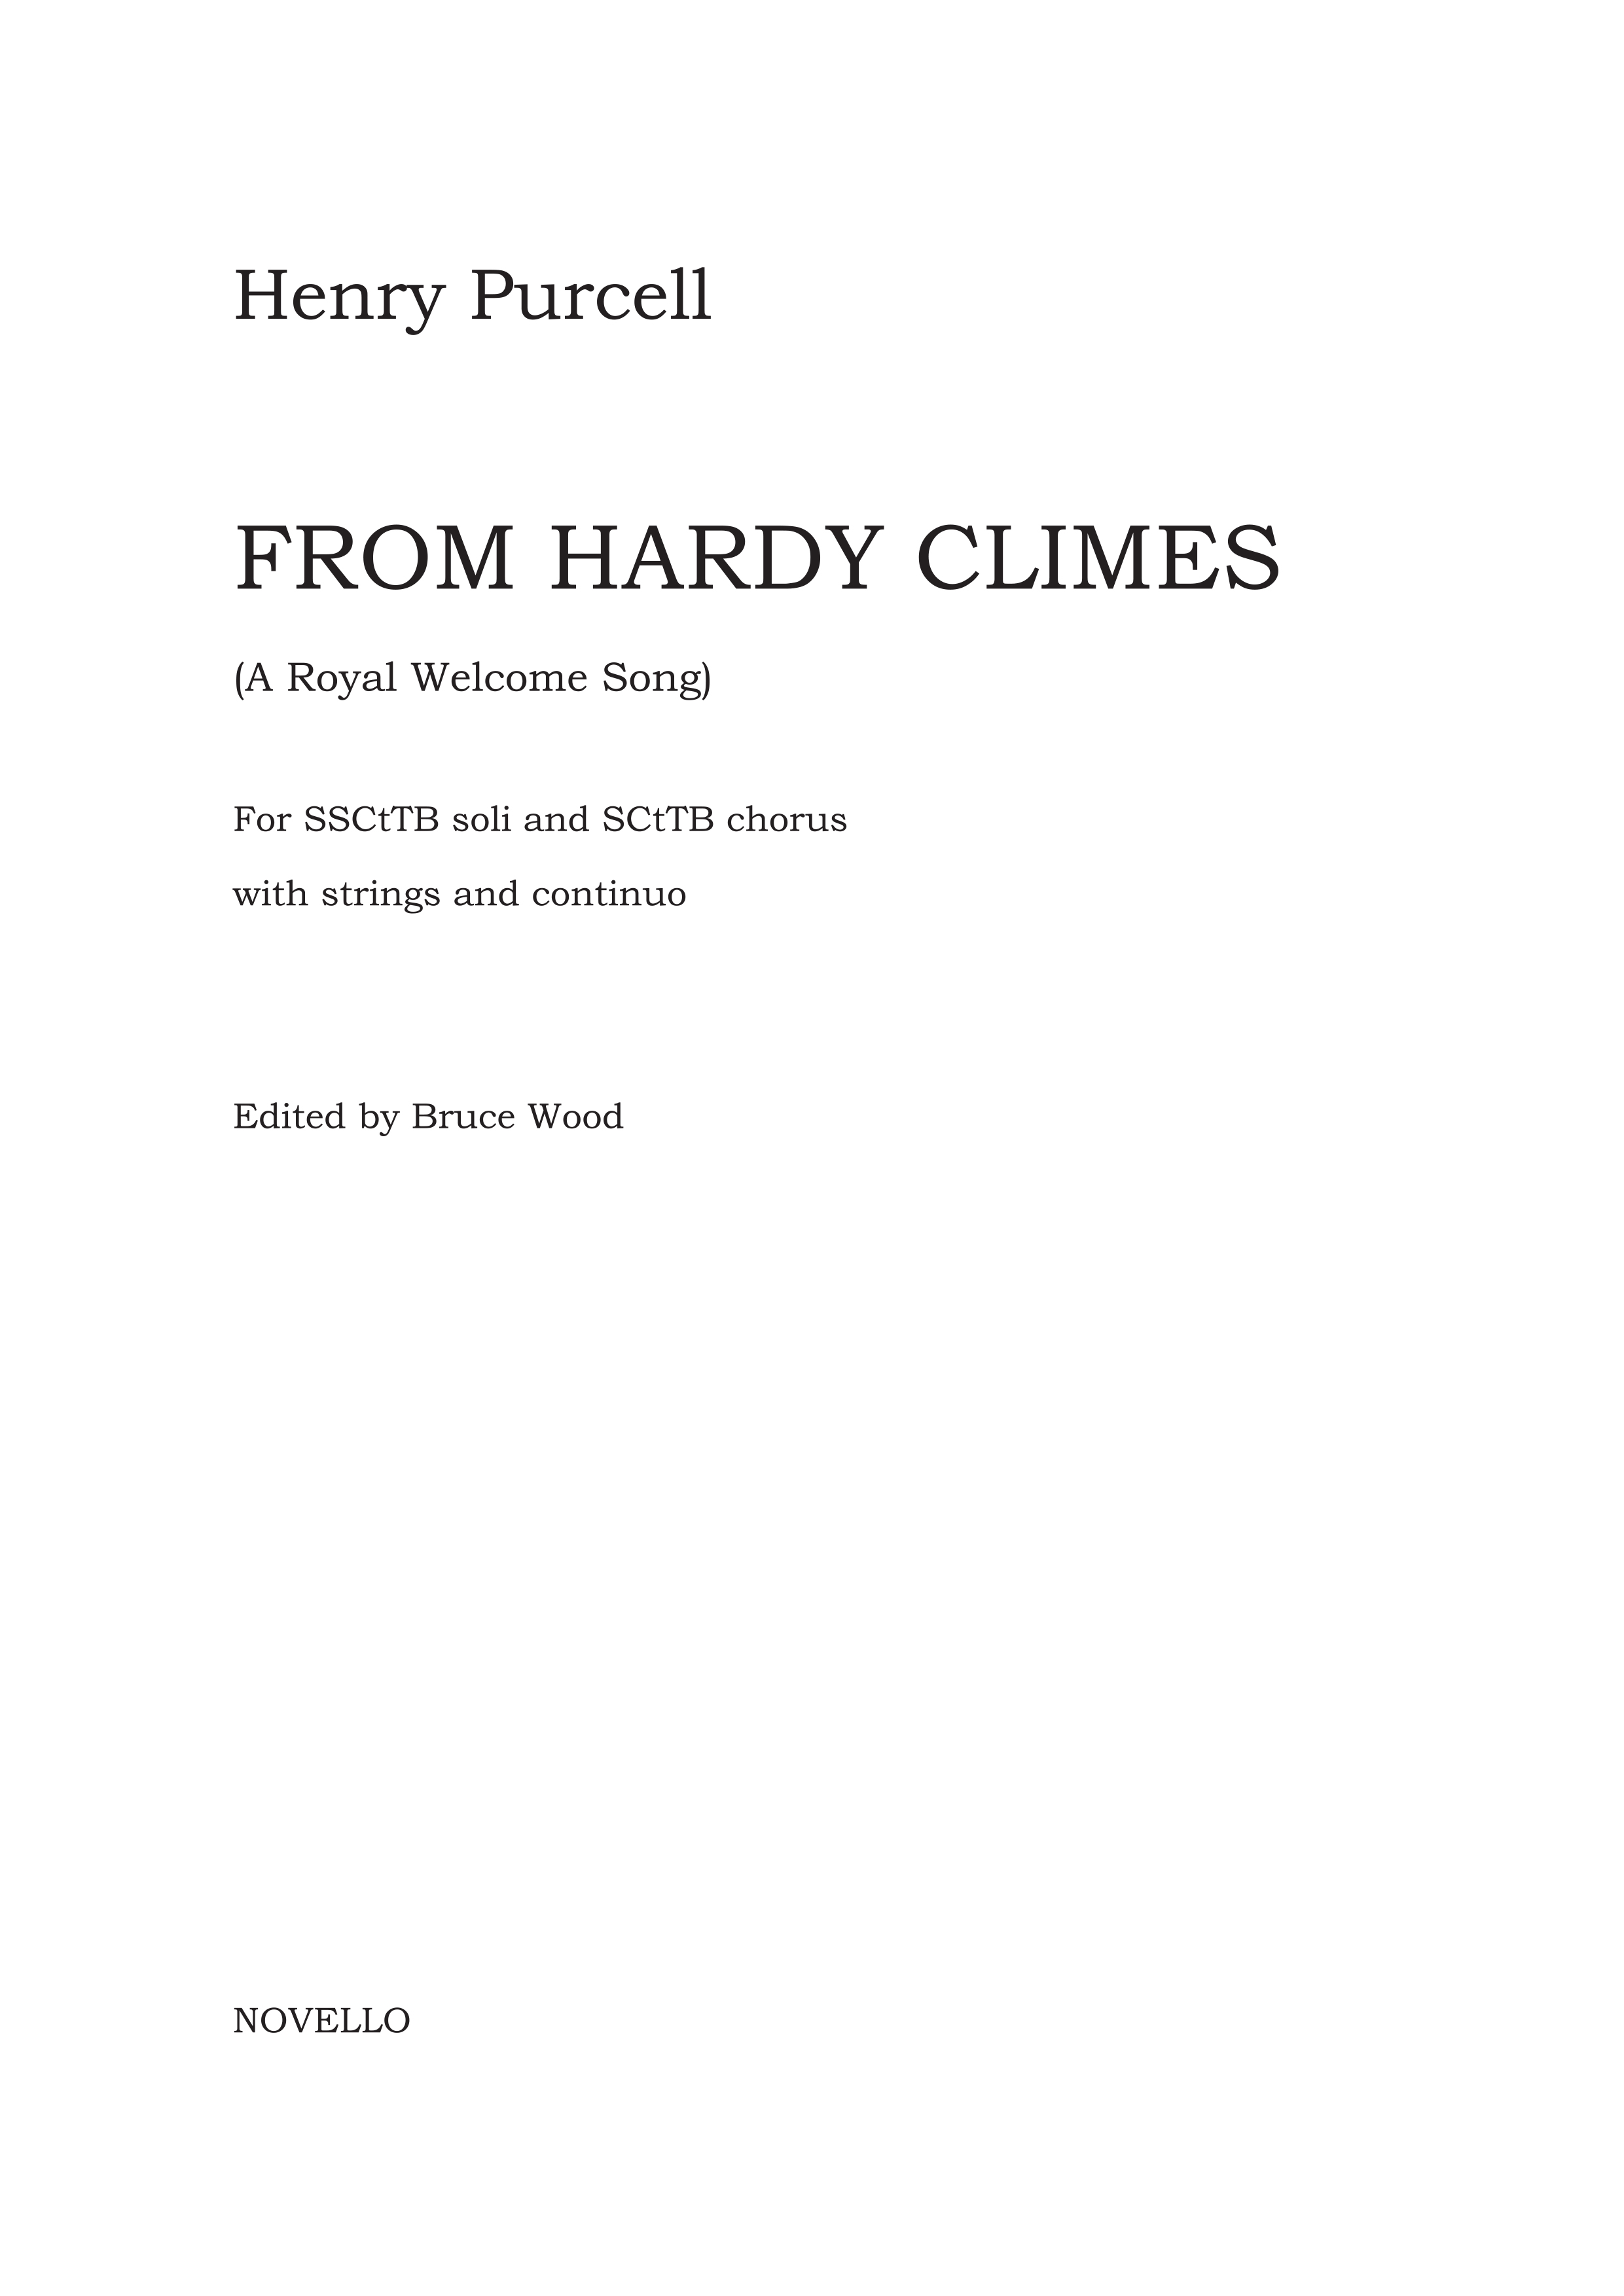 Henry Purcell: From Hardy Climes (A Royal Welcome Song): Chamber Ensemble: